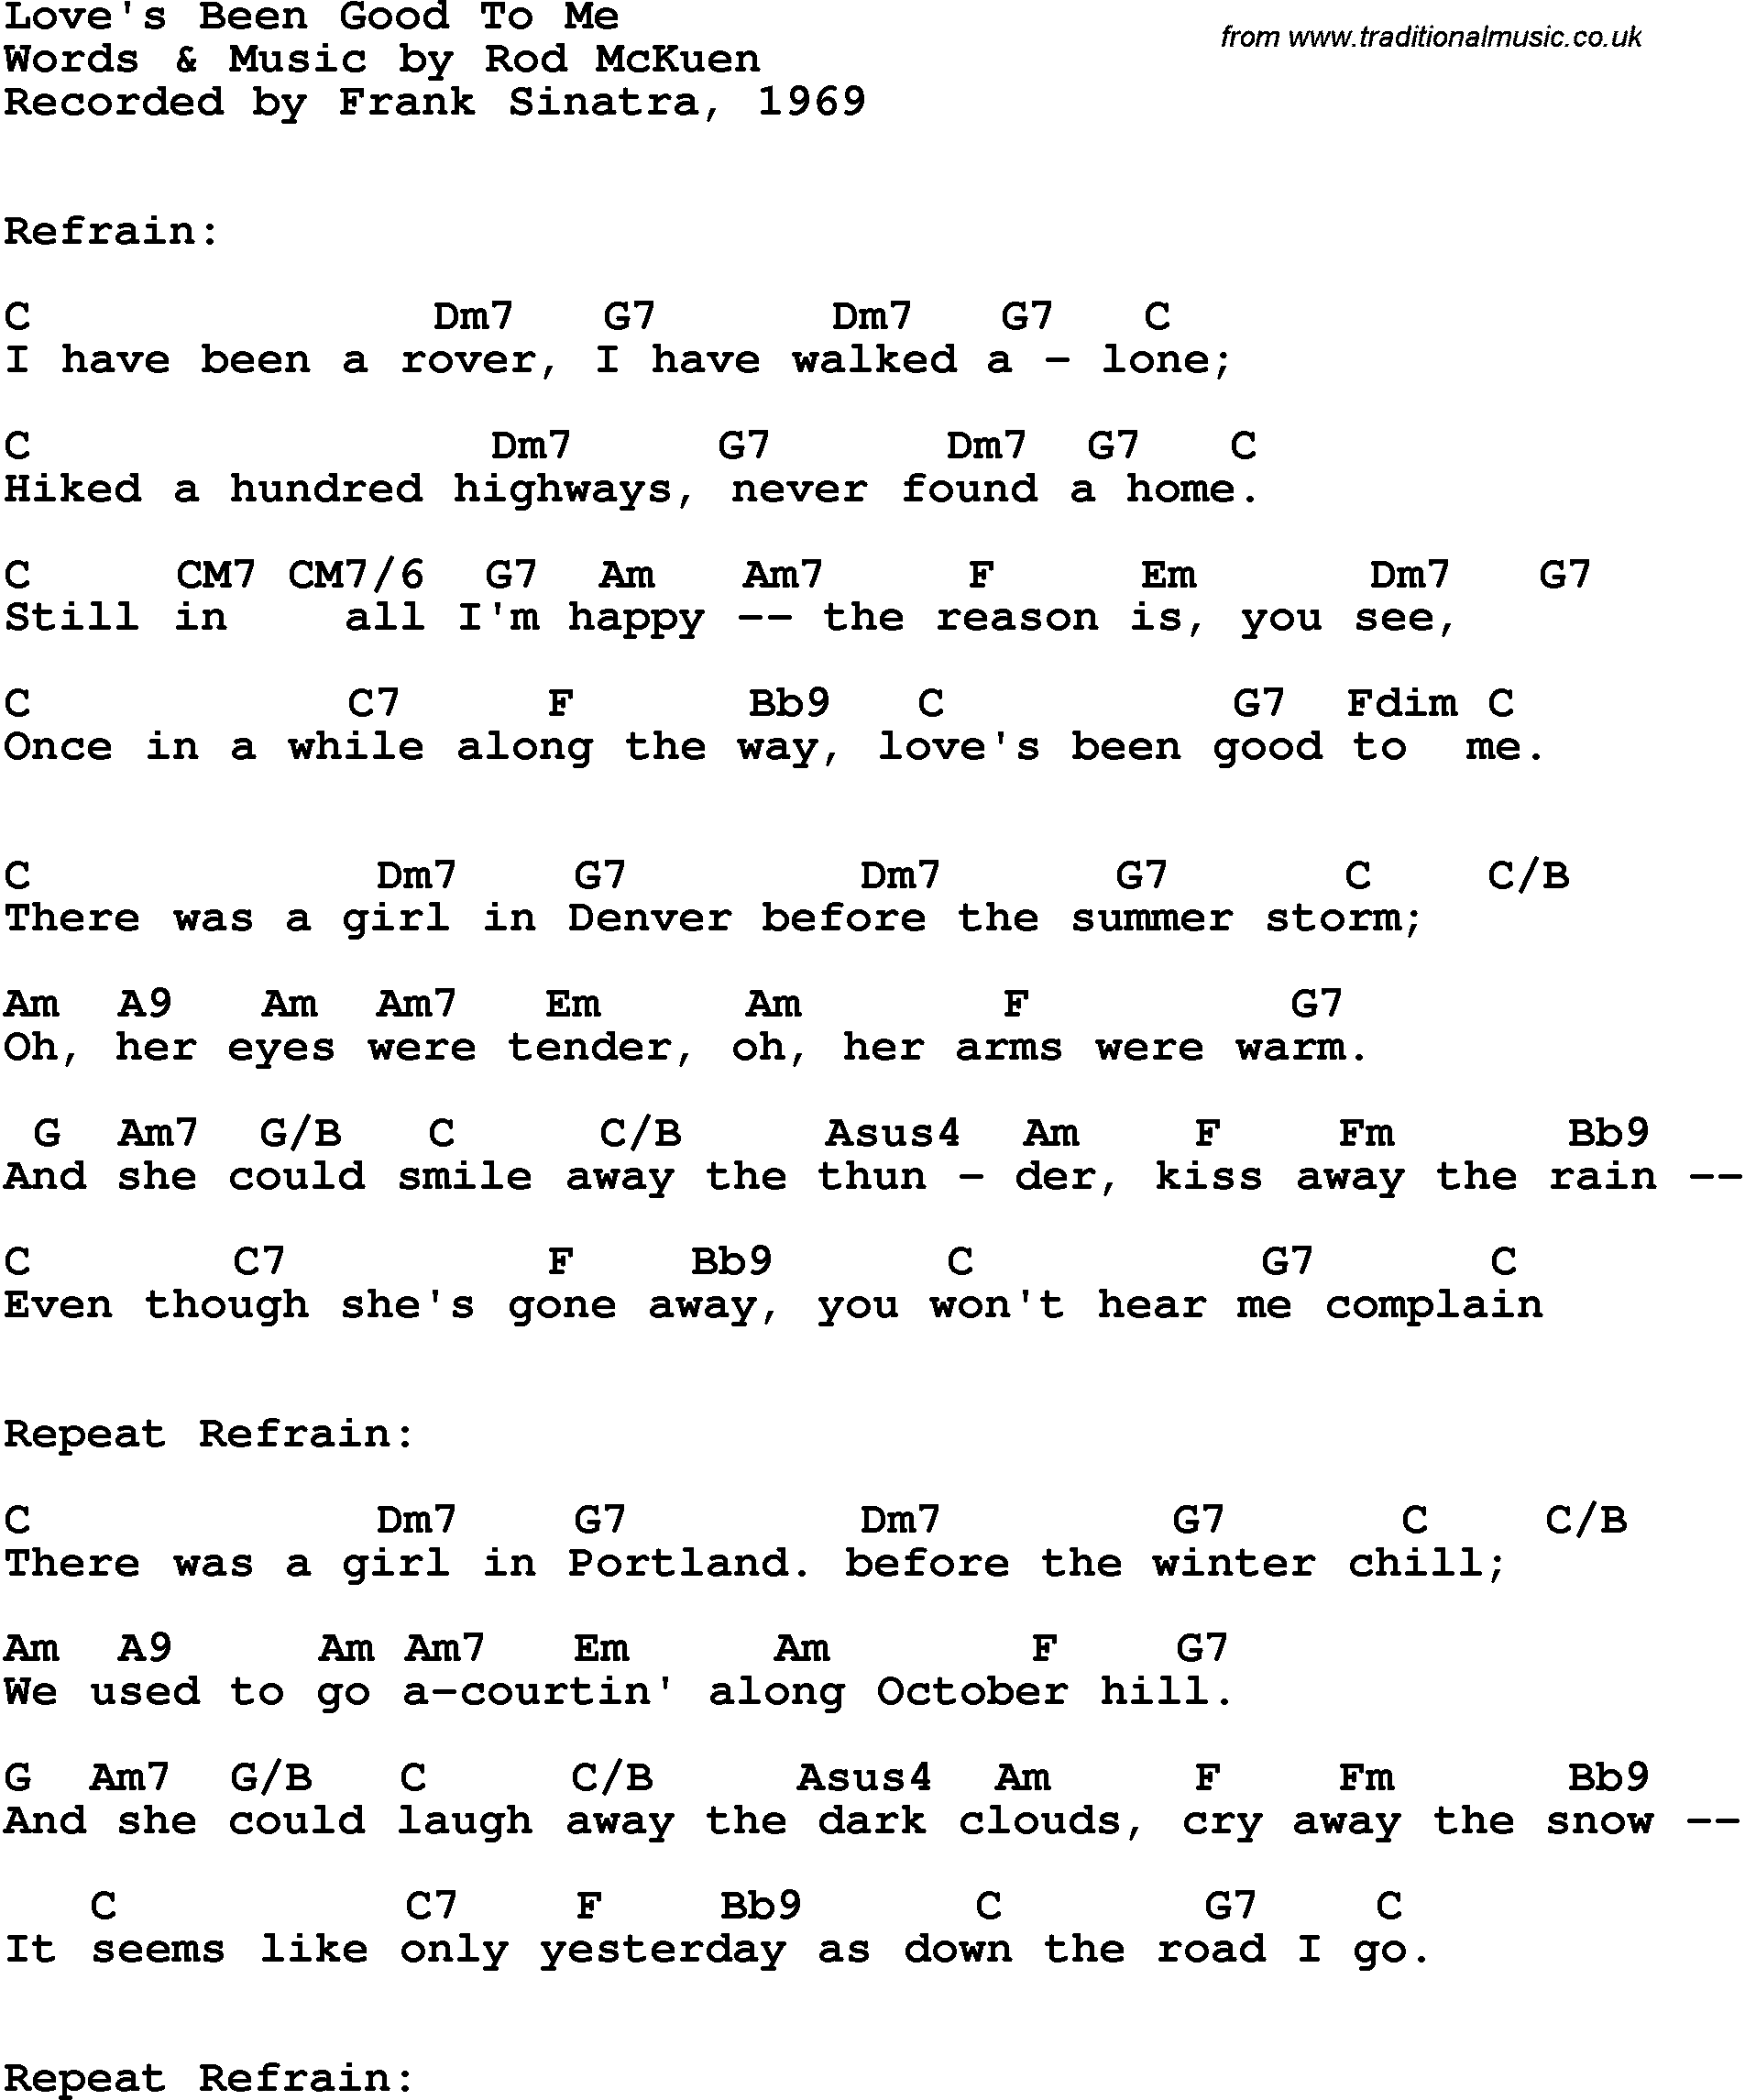 Song Lyrics with guitar chords for Love's Been Good To Me - Frank Sinatra, 1969